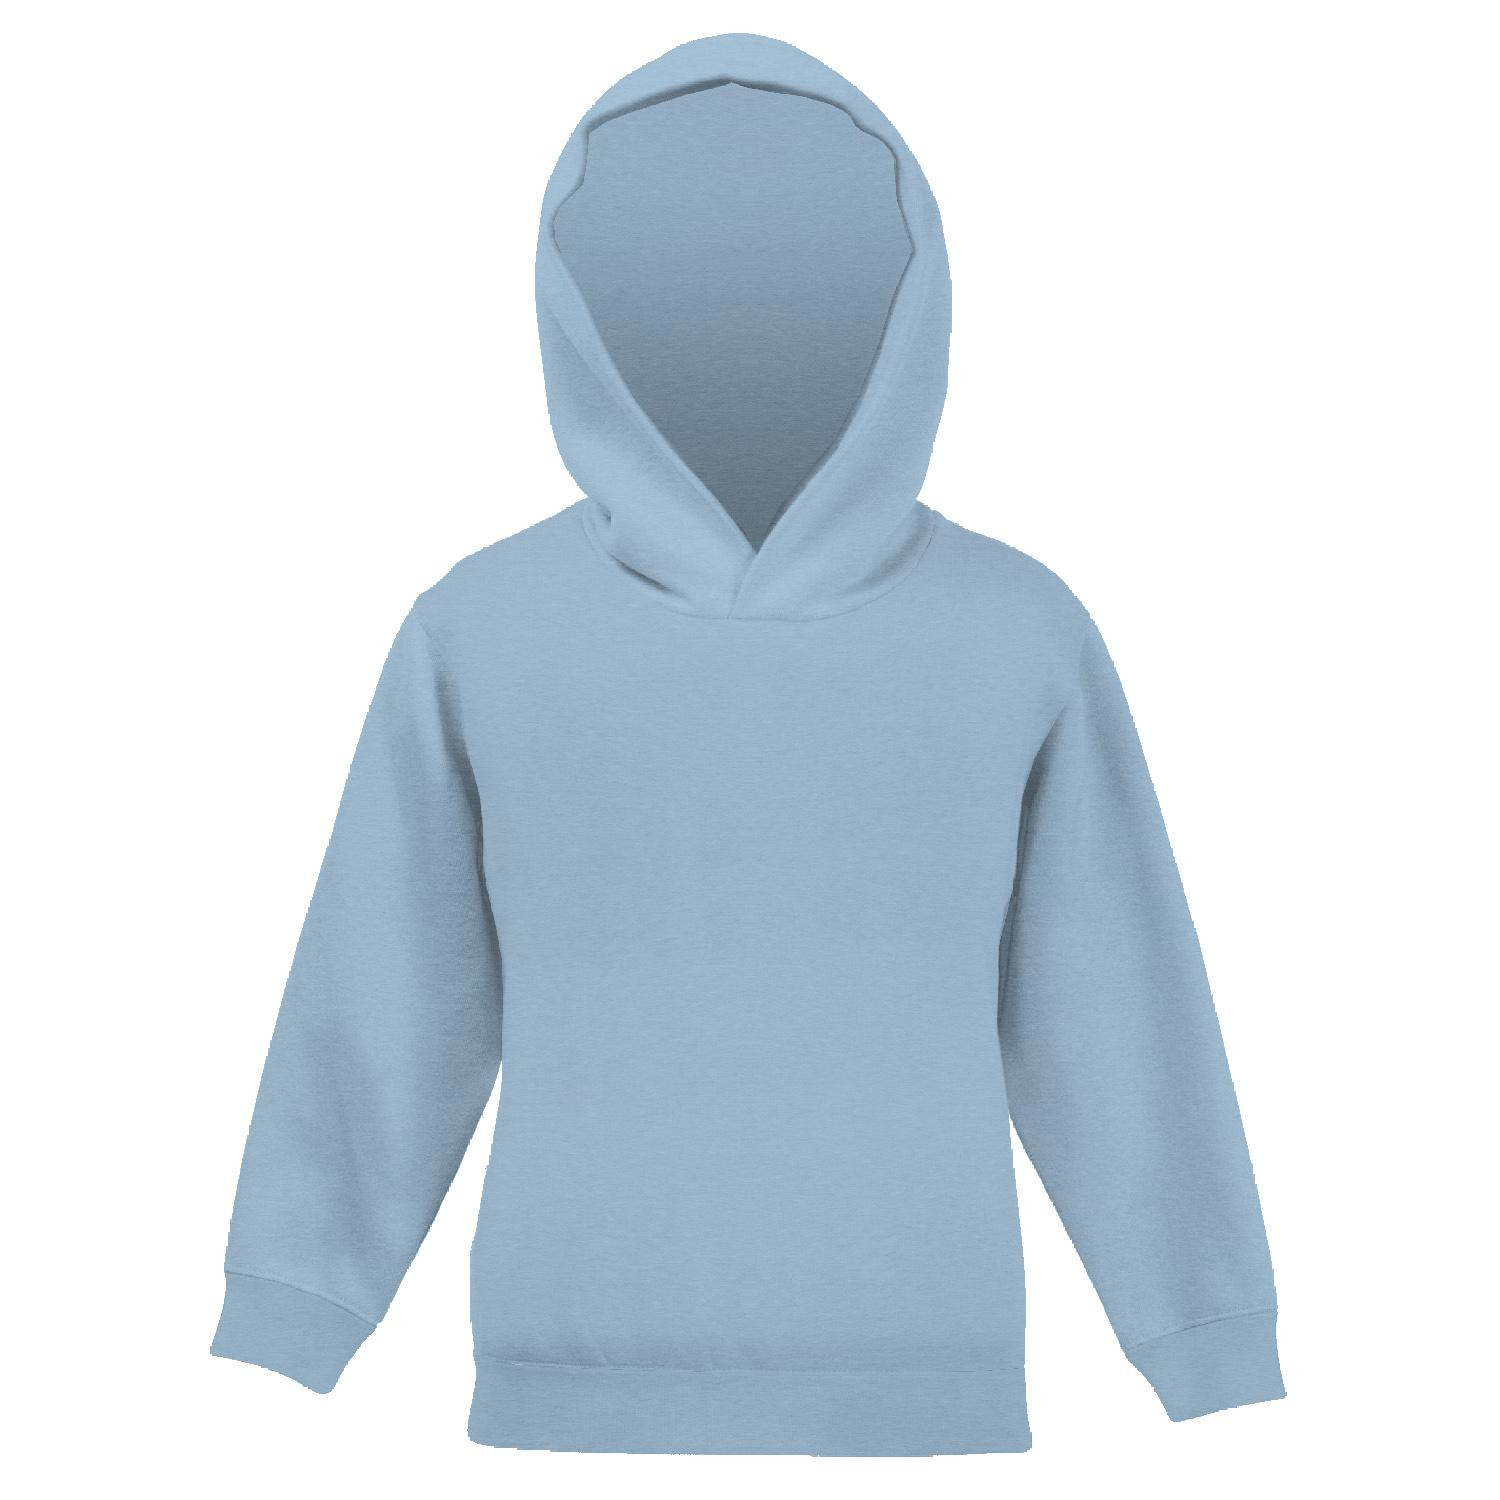 Children's tracksuit (OSLO) - B-06 SERENITY / blue - looped knit fabric 